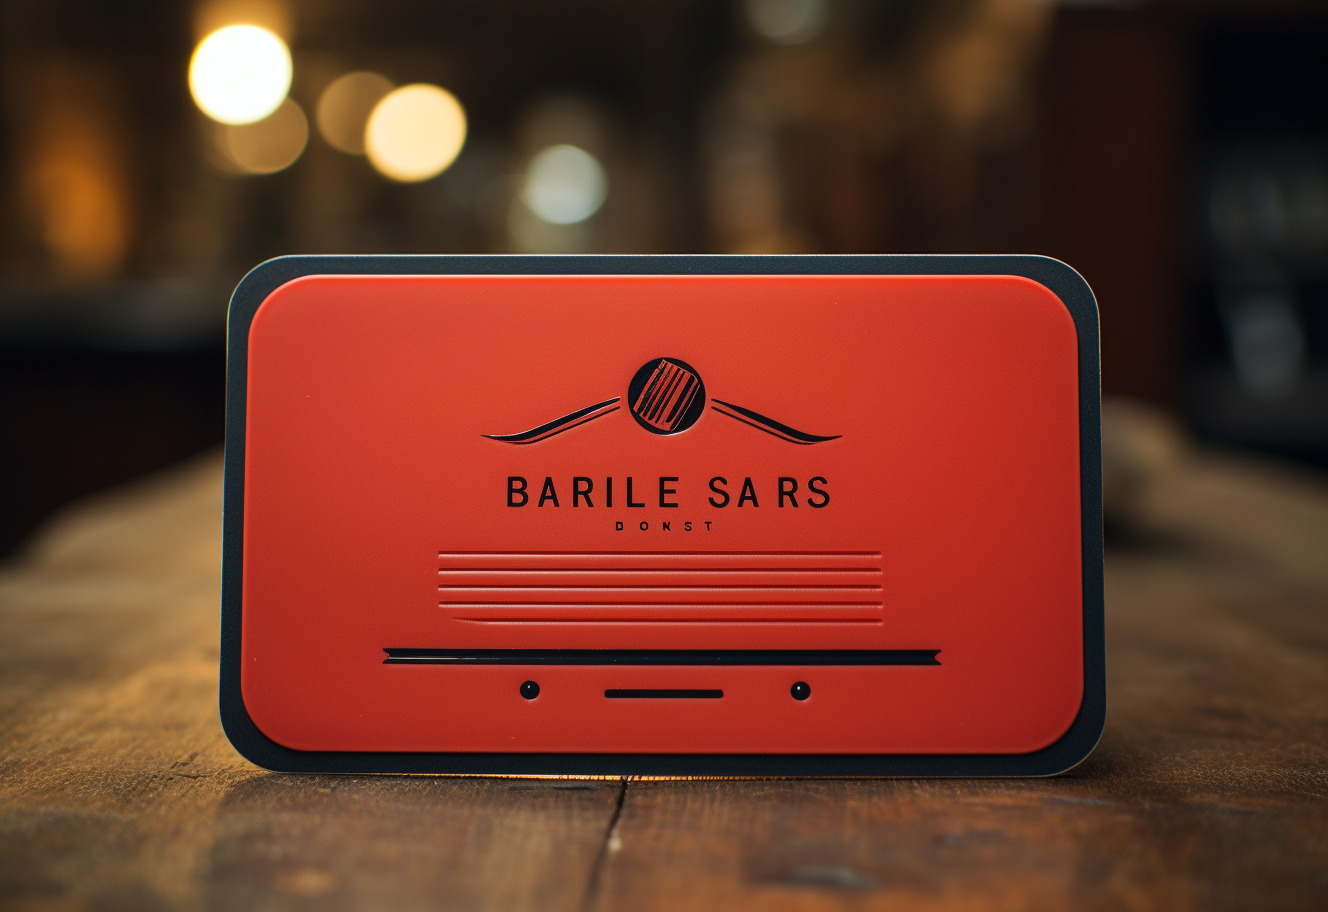 Free 1920x1080 Business Card Designs for Barbers